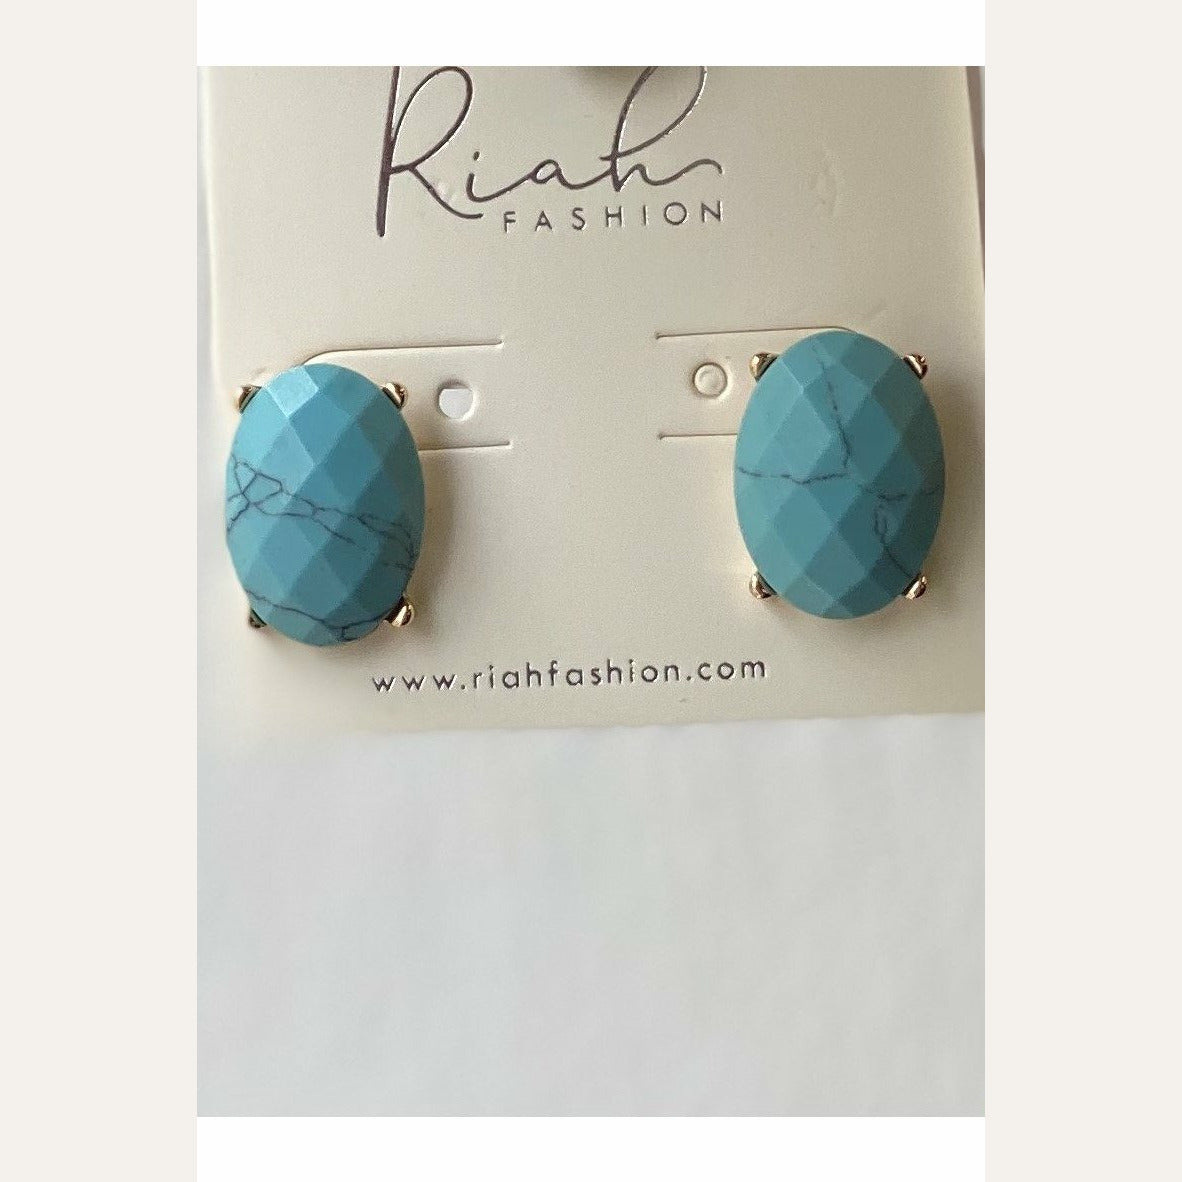 Turquoise Oval Stone Post Earrings by Mys sold by Tea-Shirt Shoppe - image_82d73bd7-c89f-458b-91a4-ebba058d468d.jpg